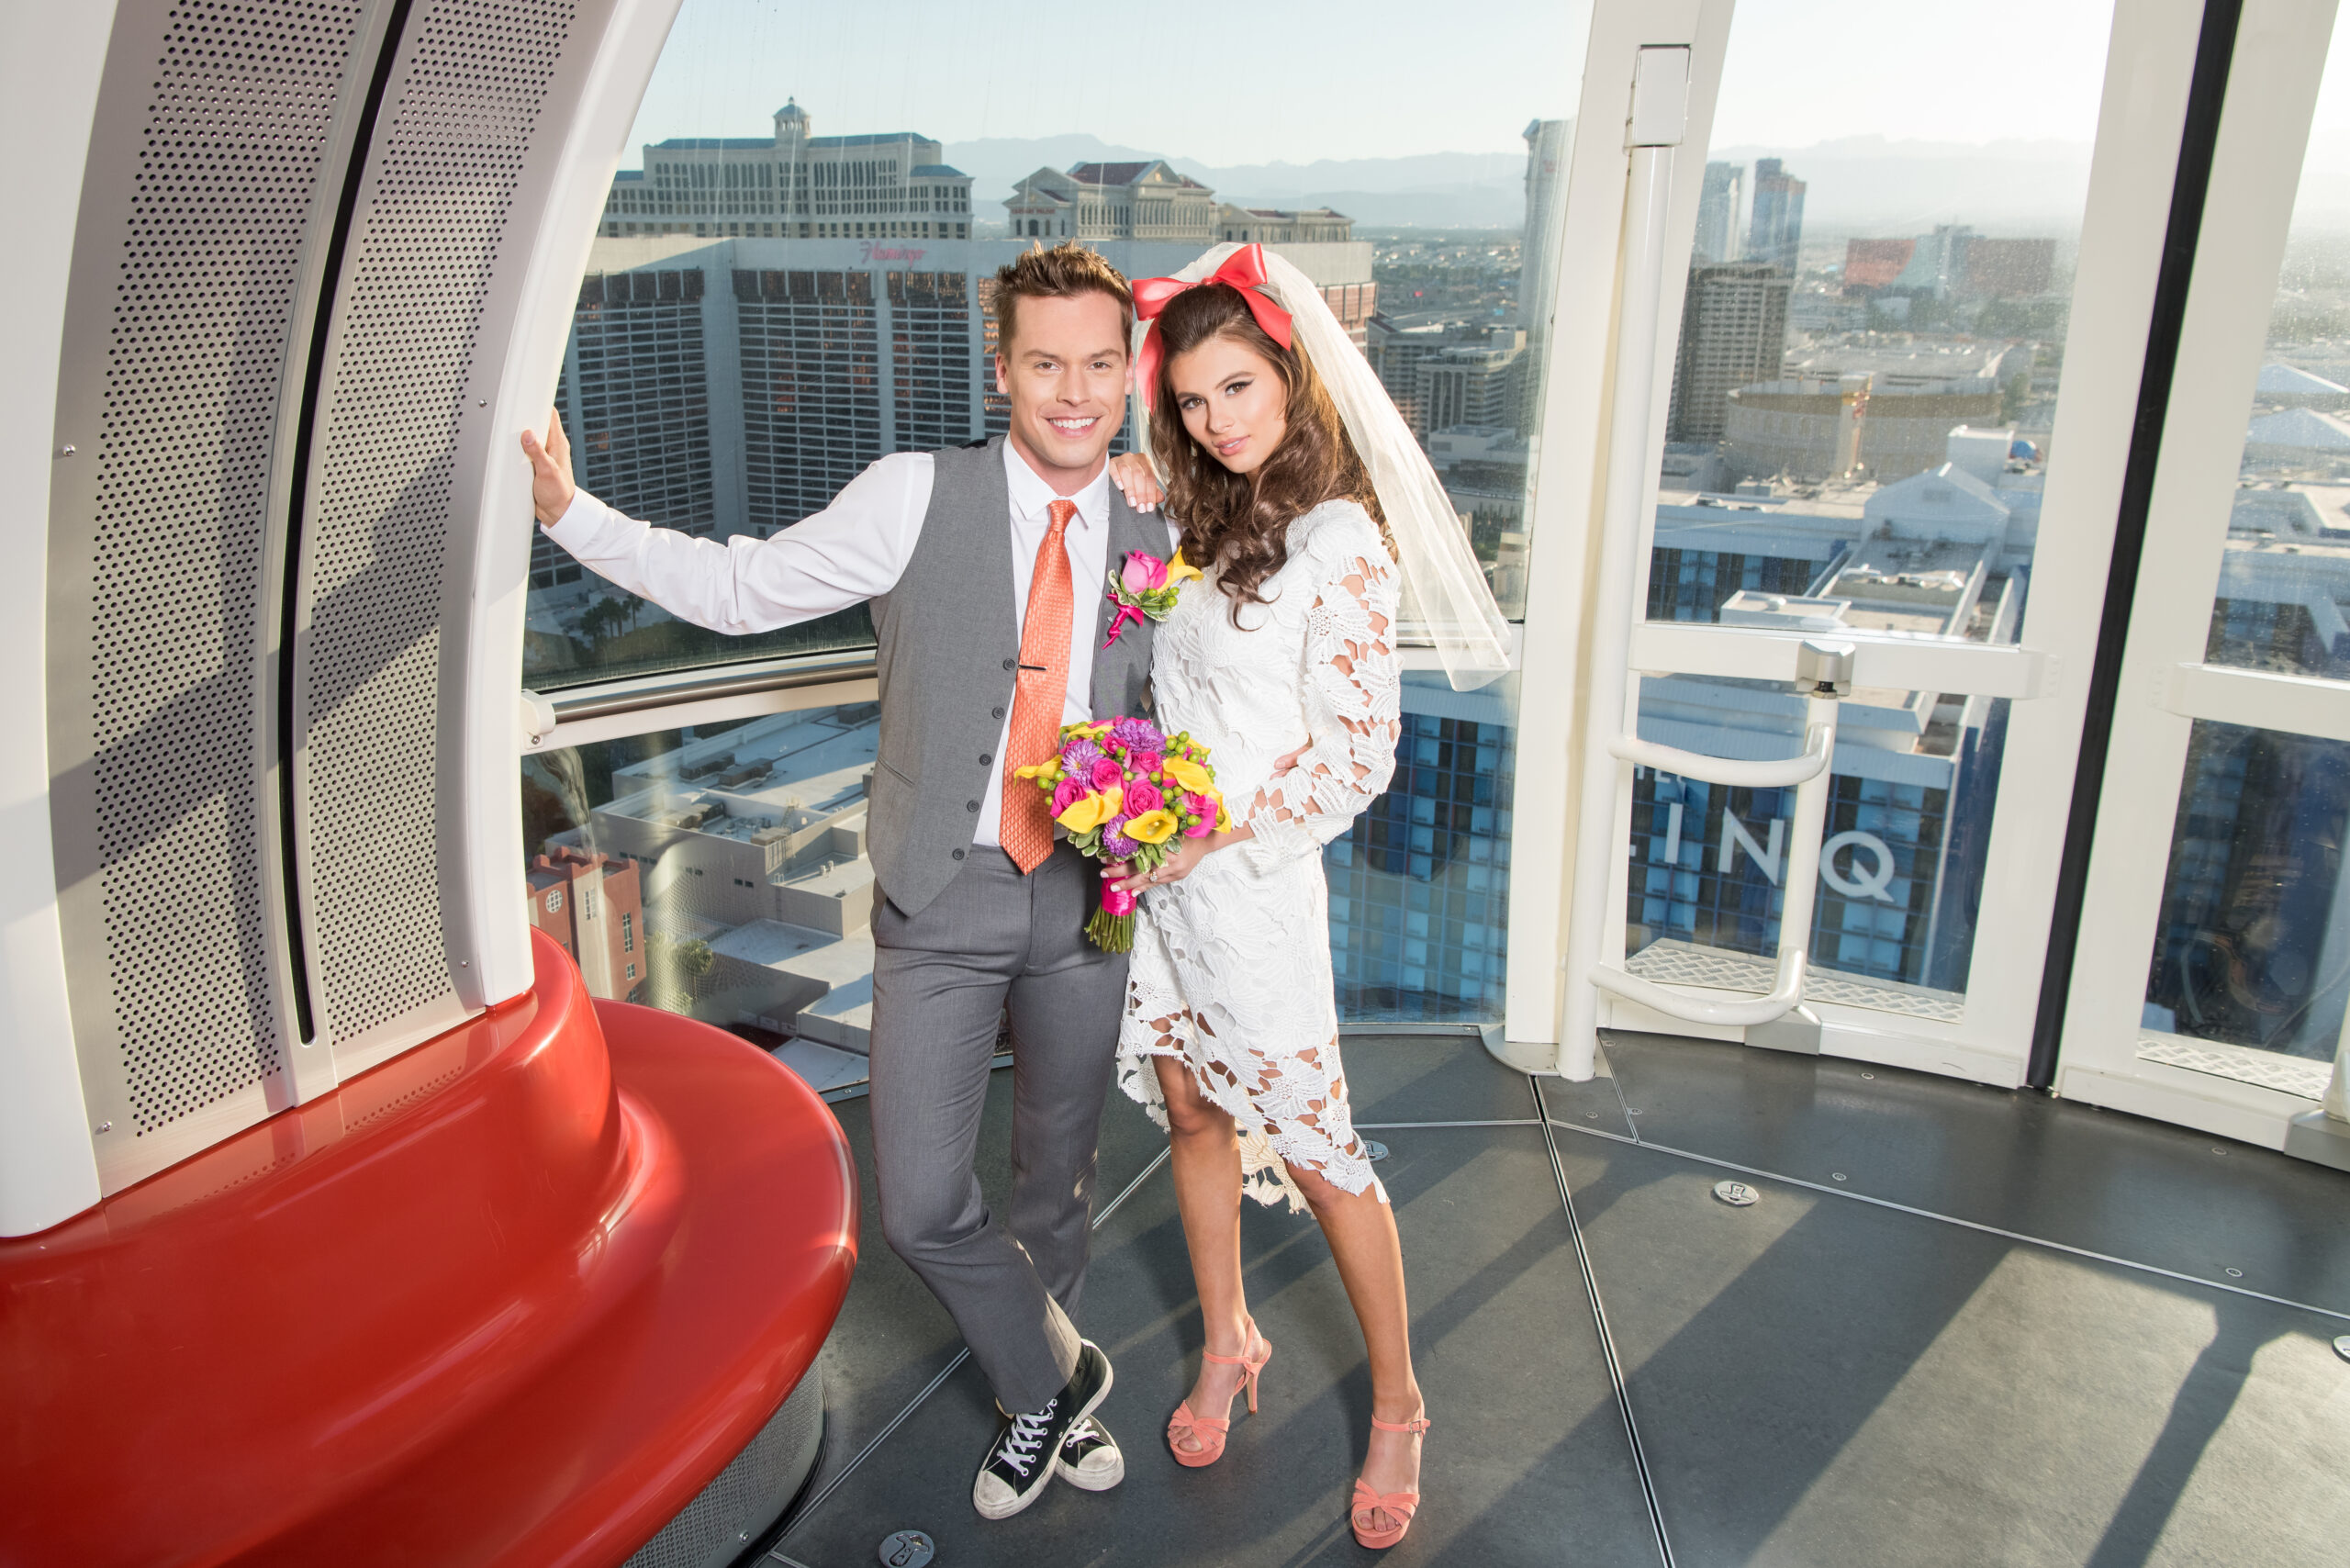 Unique Places to Get Married in Vegas - One of a Kind Venues